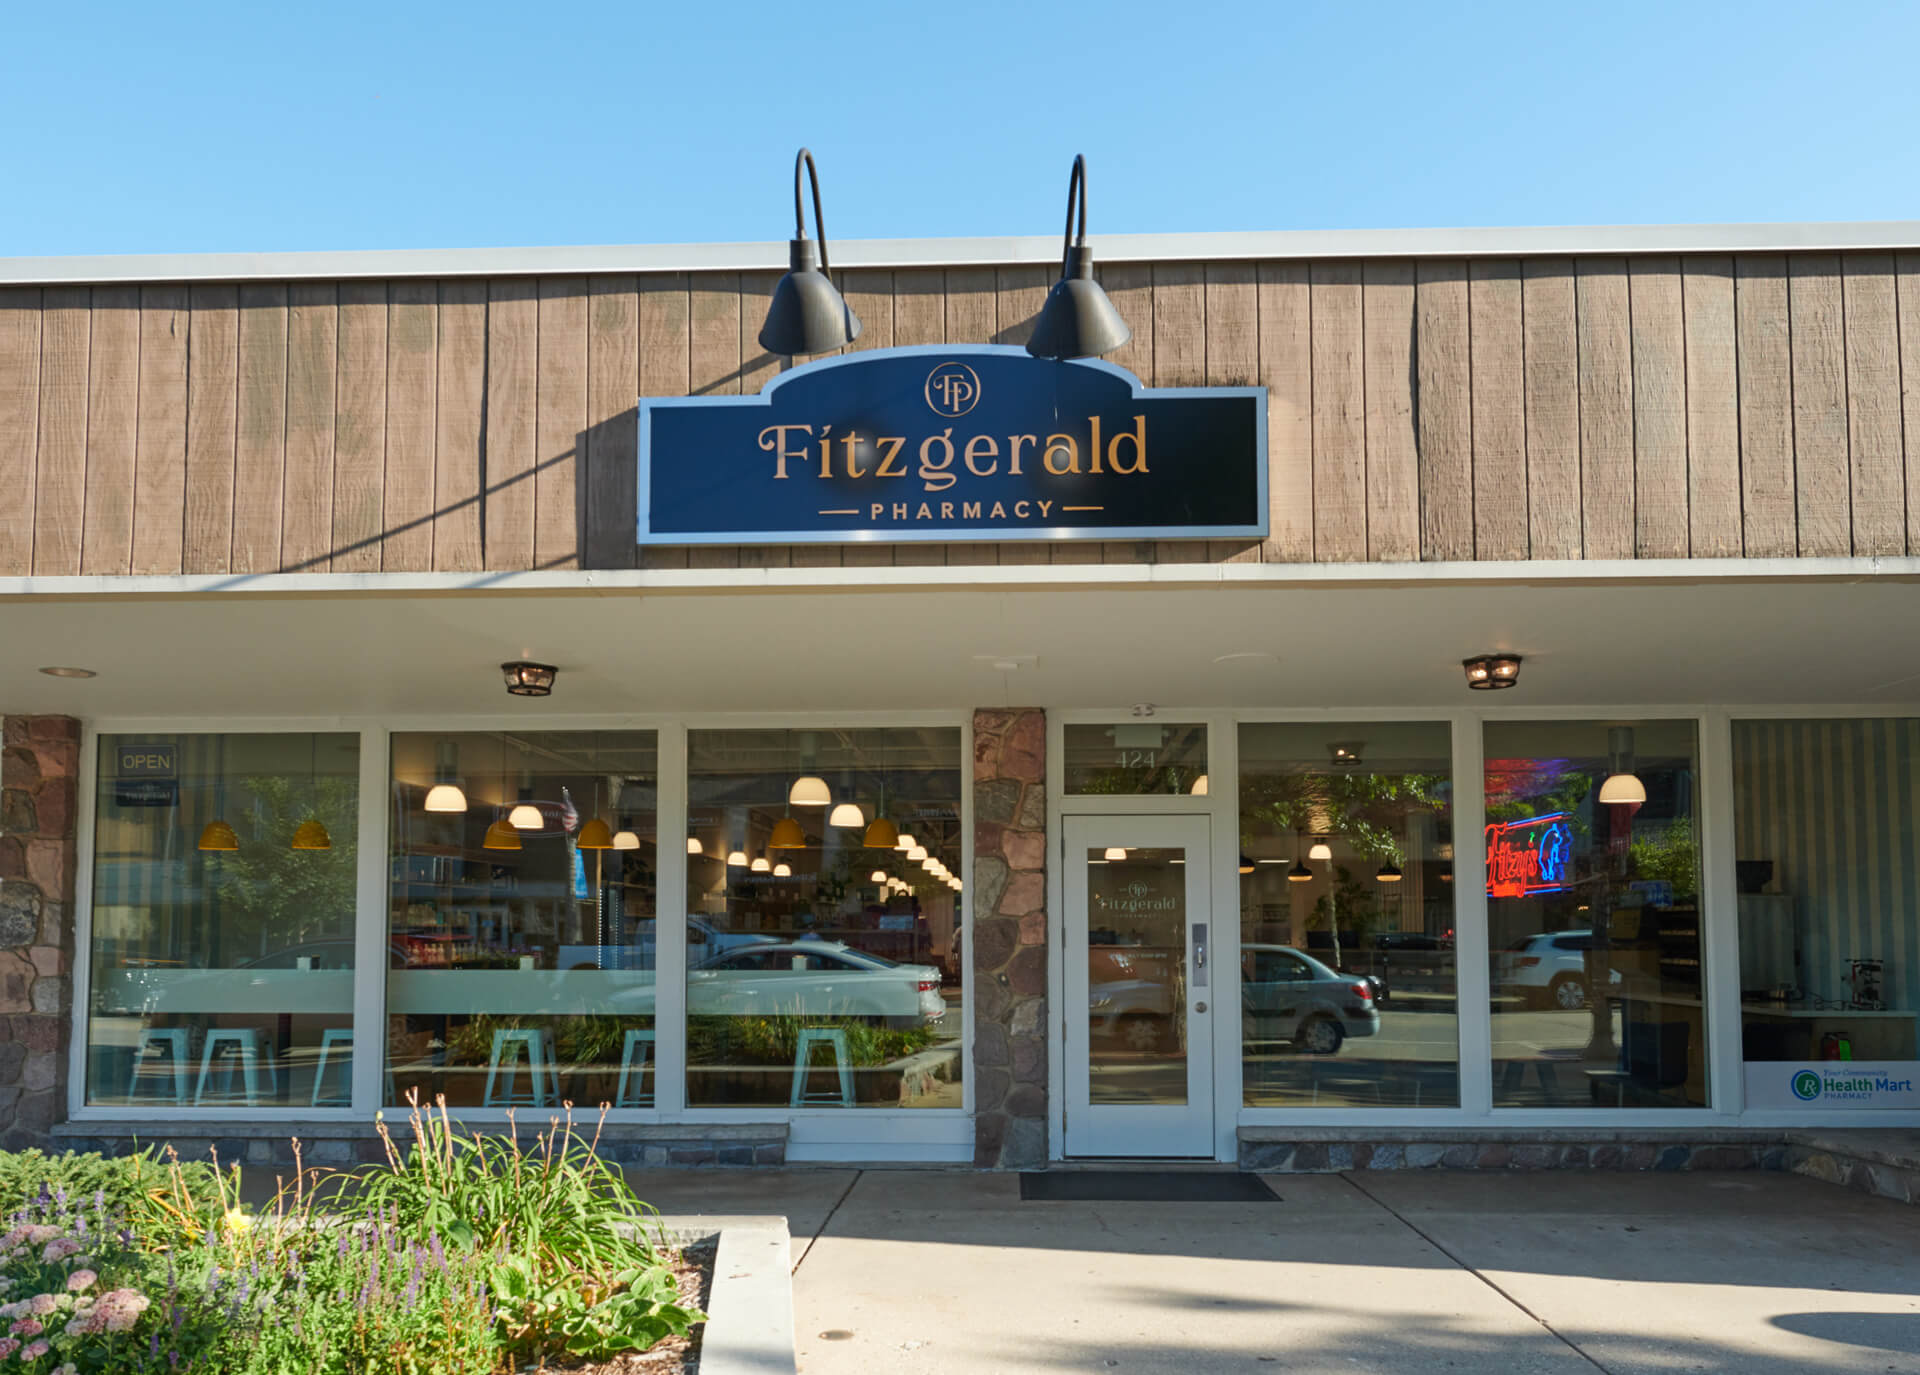 Fitzgerald's Whitefish Bay storefront with large big windows, and green bushy landscaping out front